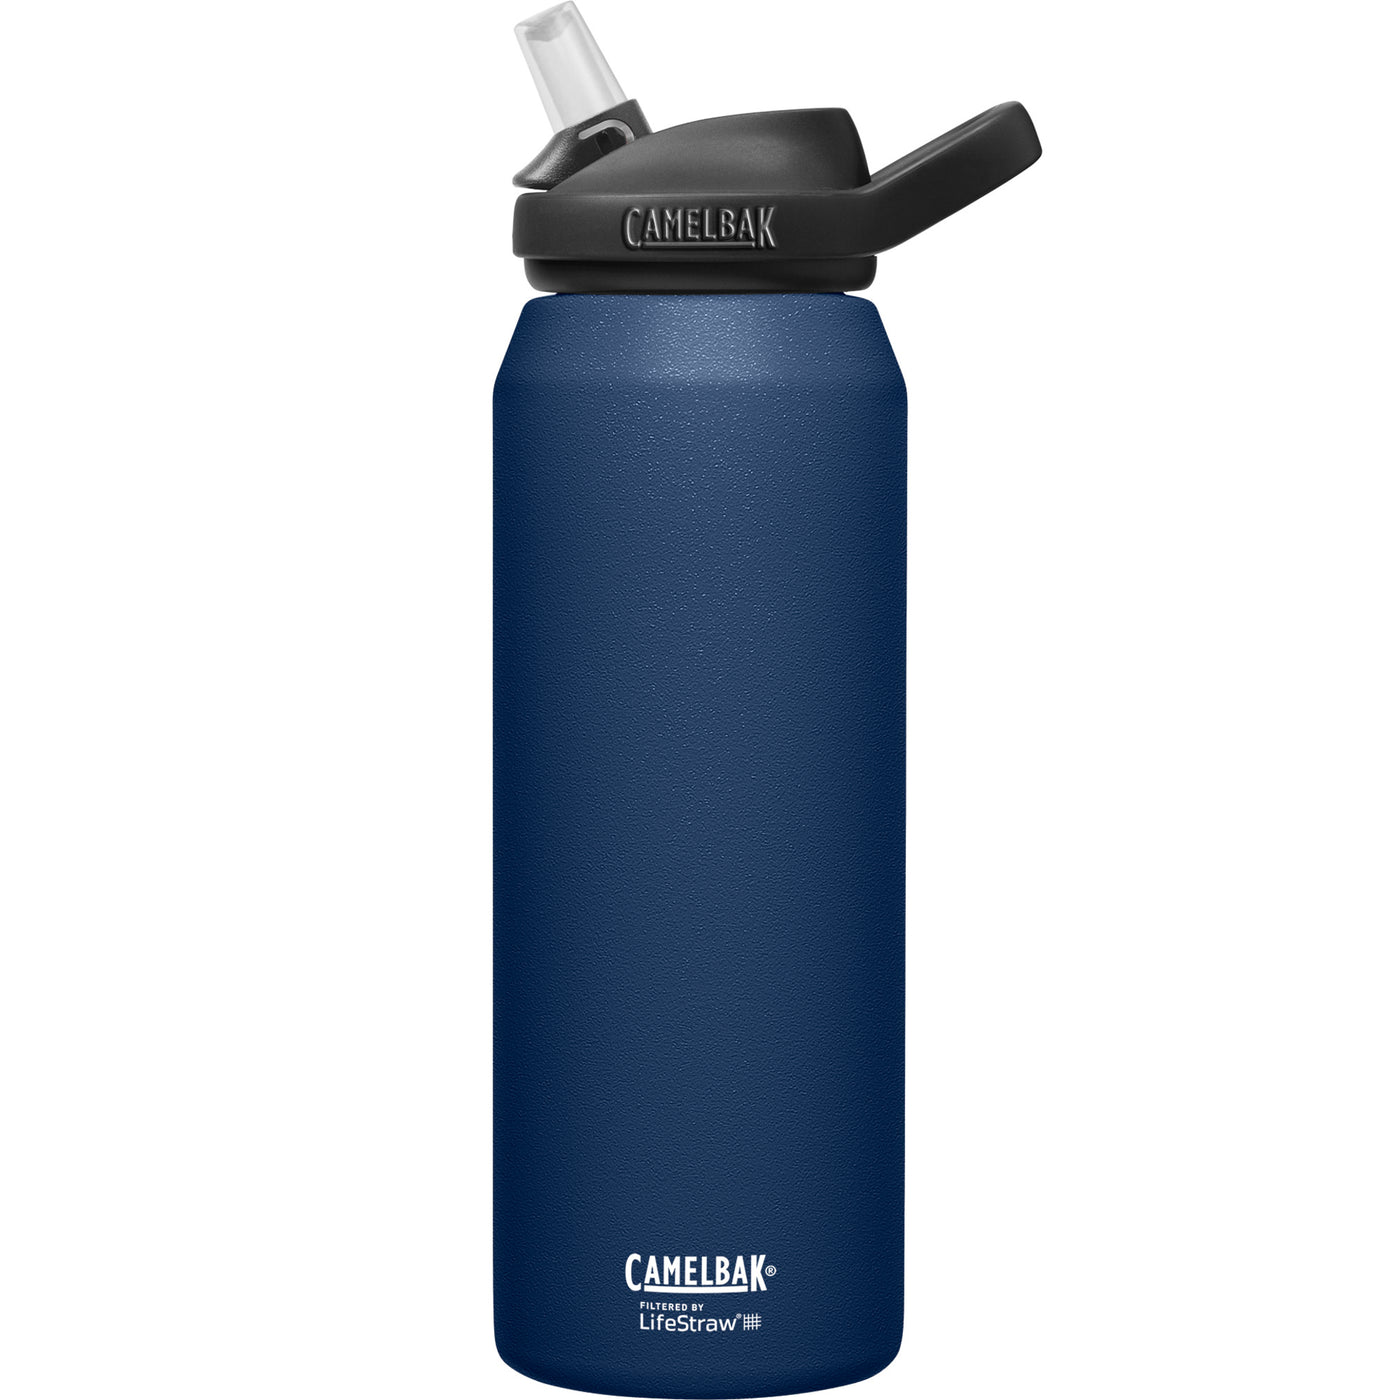 eddy+ Stainless Steel Vacuum Insulated filtered by LifeStraw